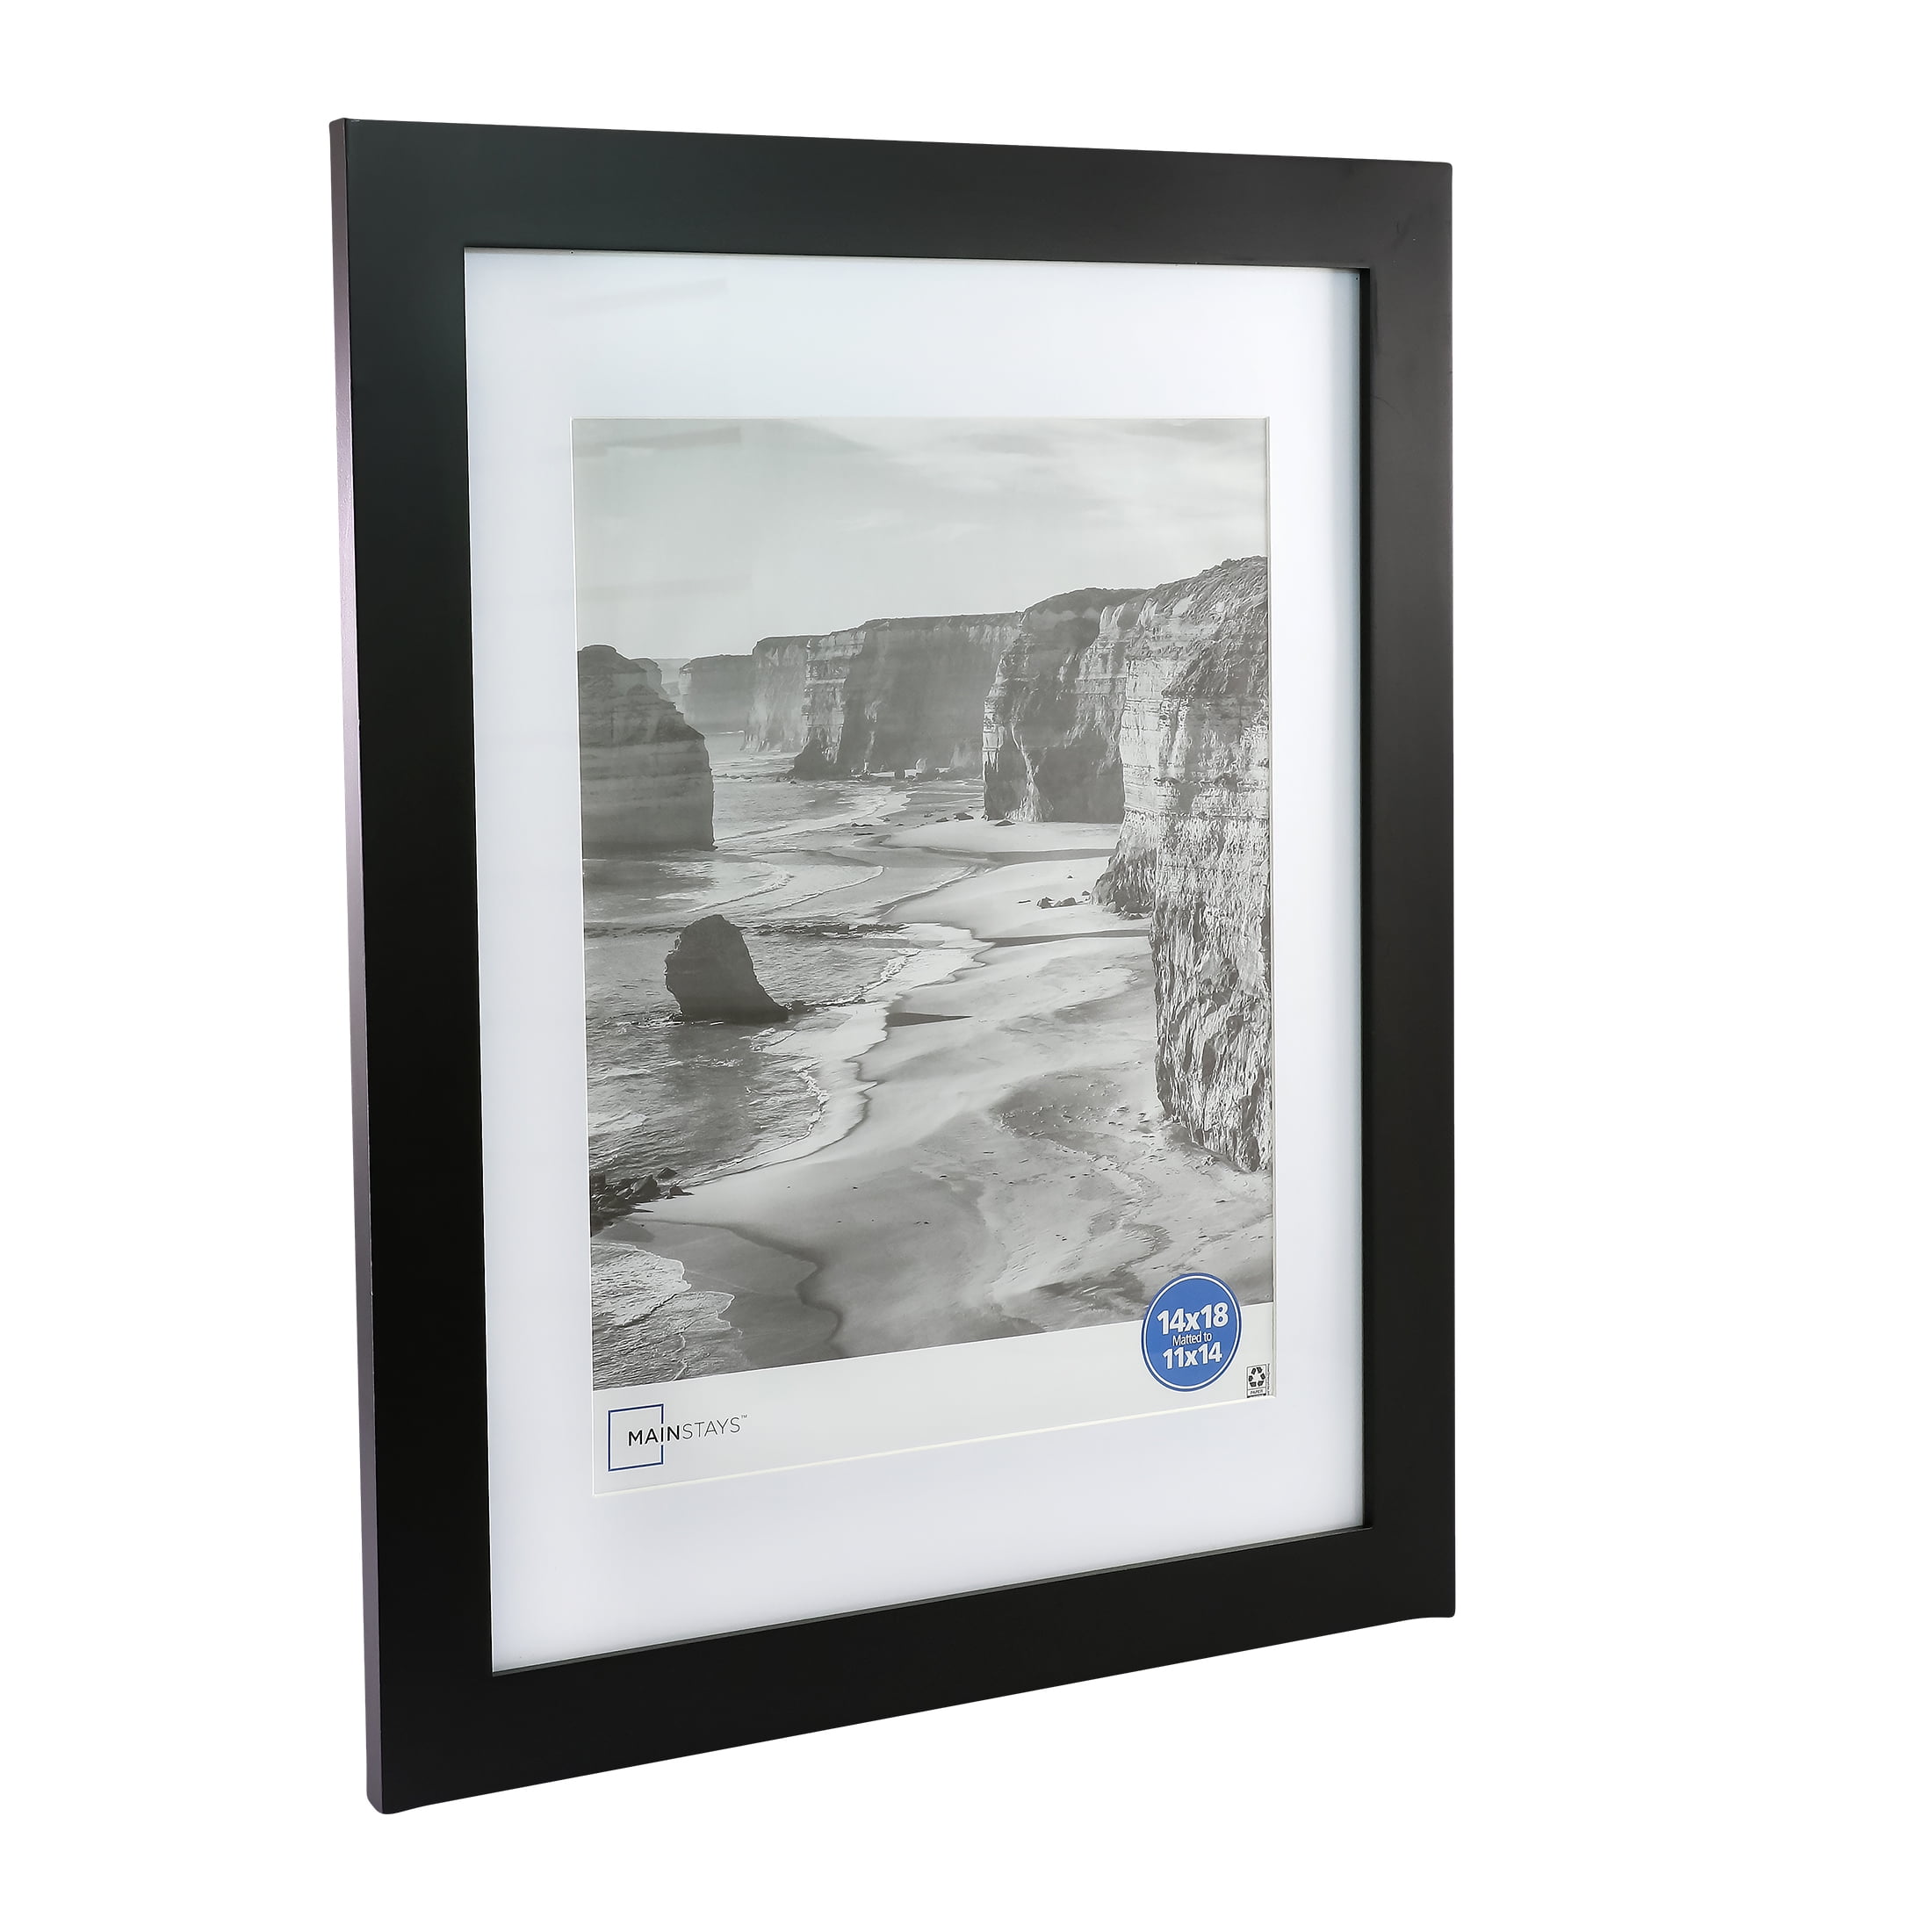 Mainstays 11x14 Matted to 8x10 Blue Chambray Decorative Tabletop and Wall Picture Frame, Size: 11 inch x 14 inch Matted to 8 inch x 10 inch